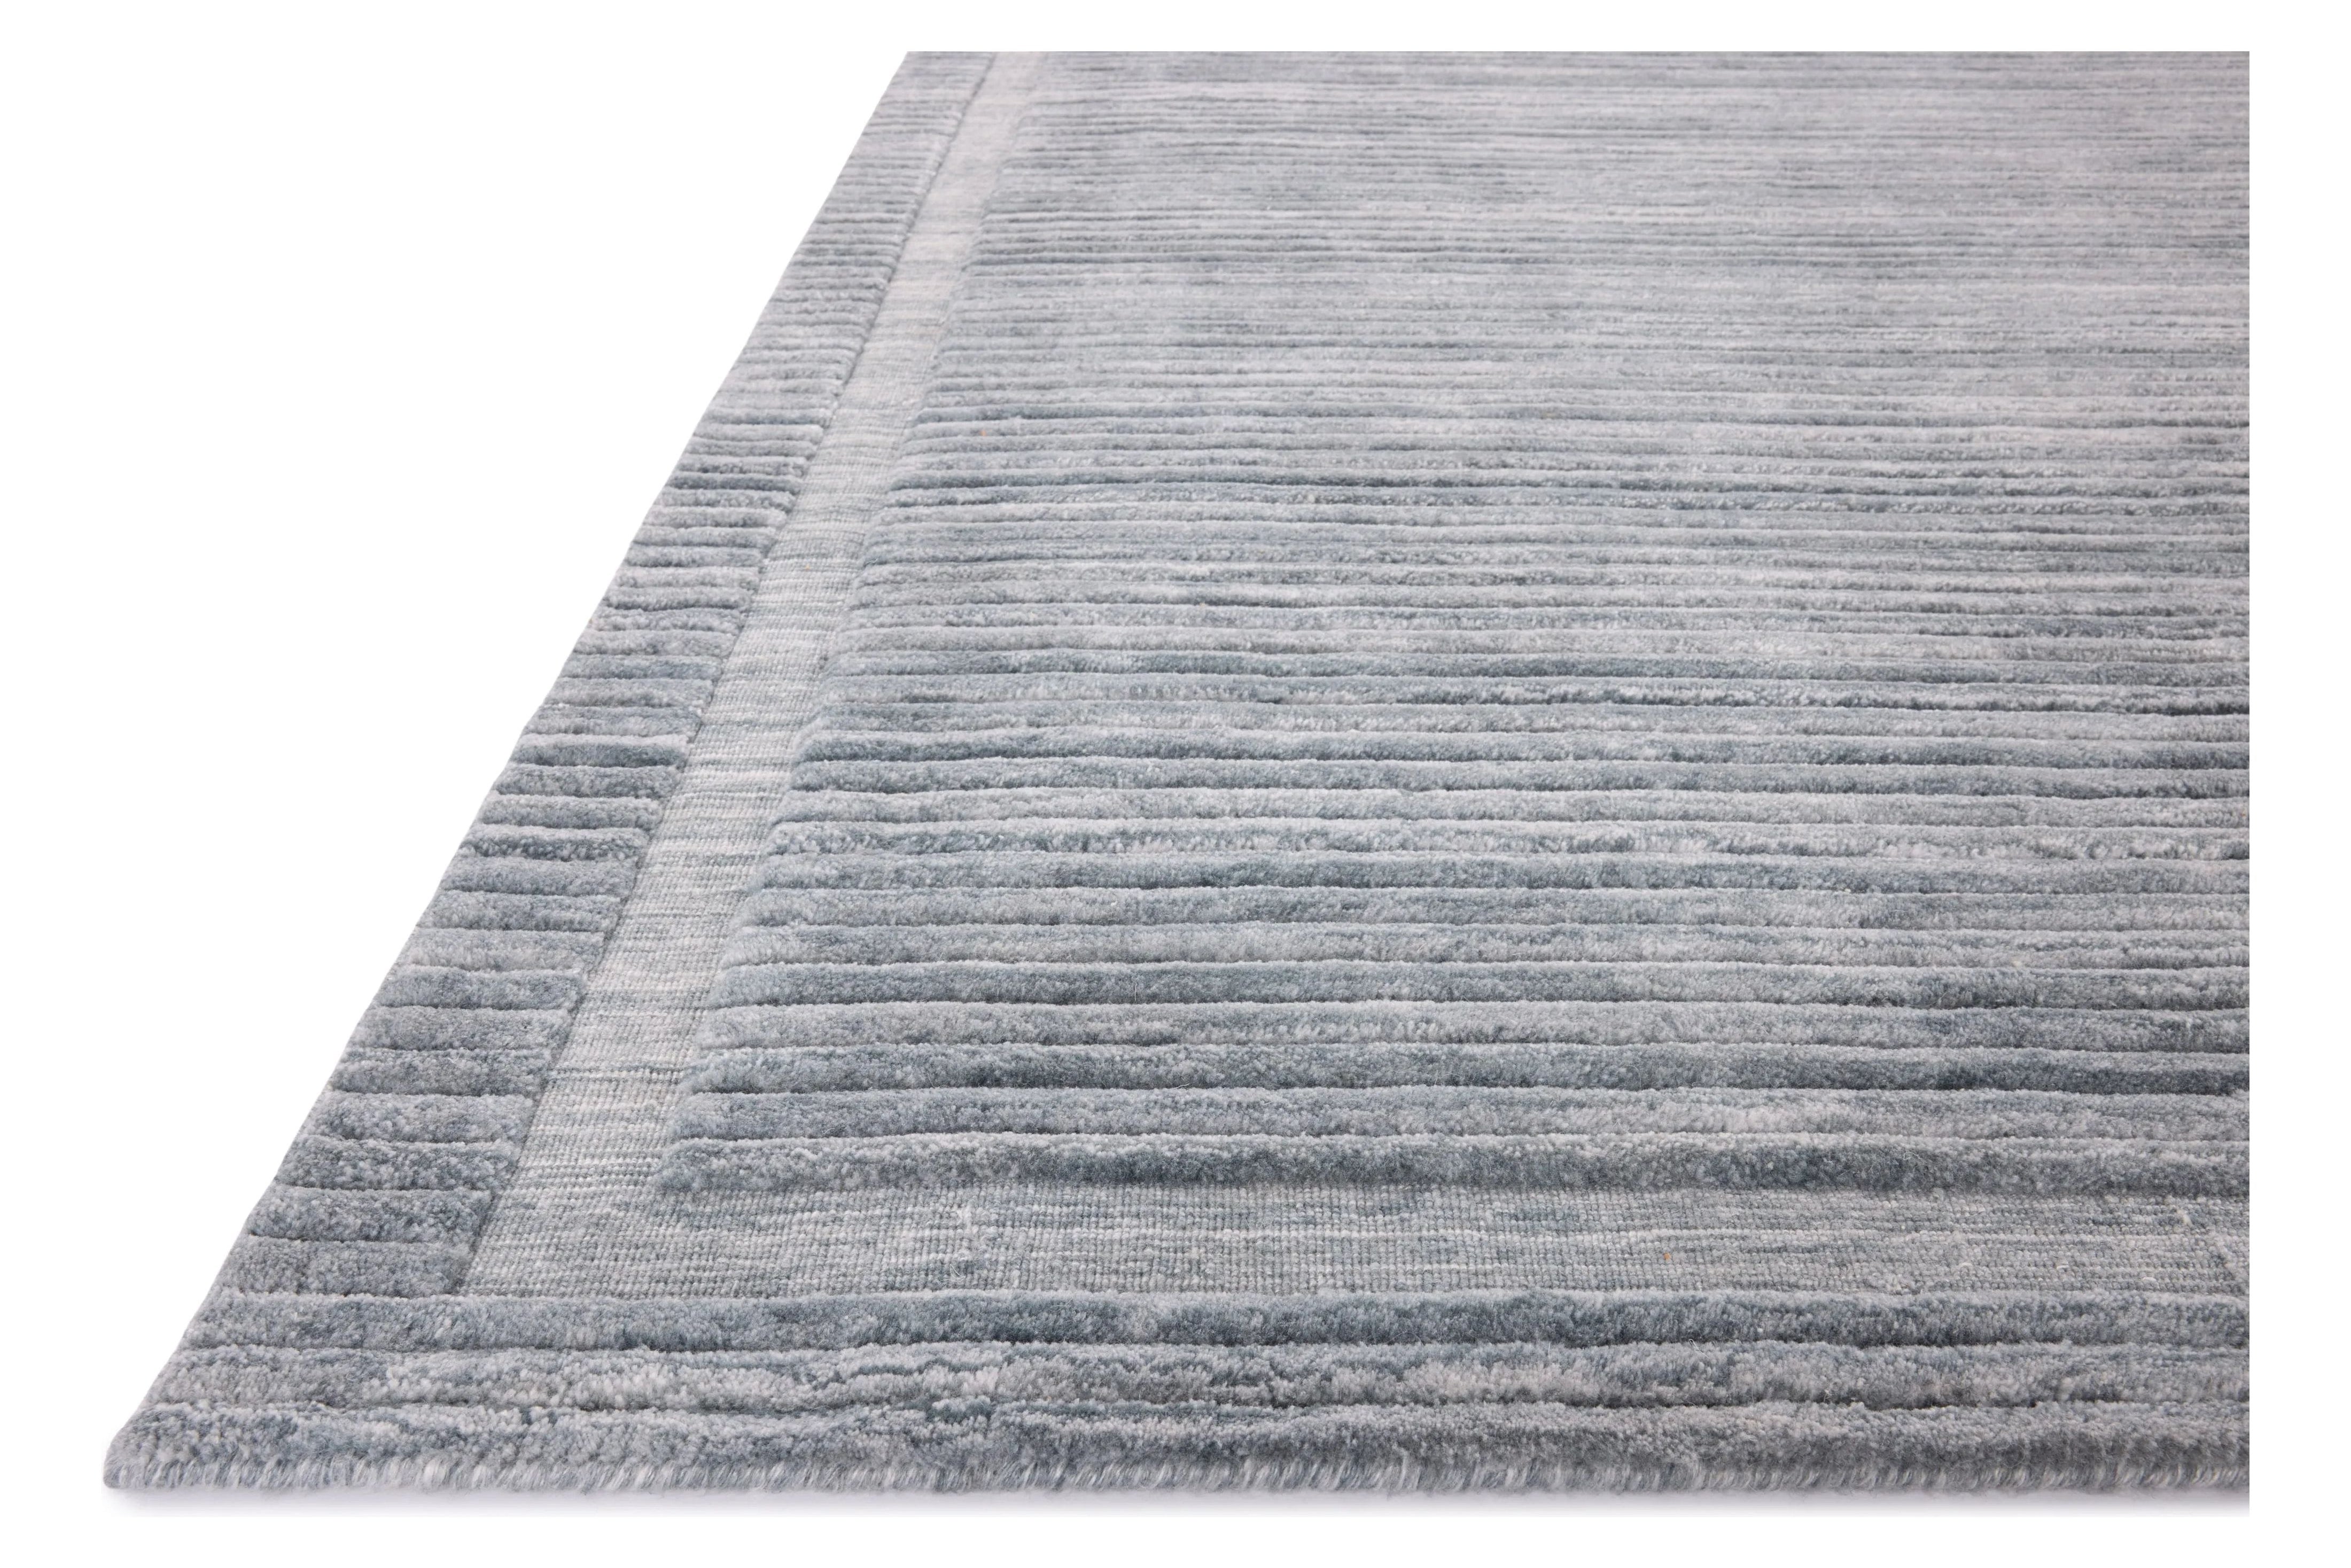 Irresistible to walk upon, the Dana Denim Rug by Brigette Romanek x Loloi has a high-low texture that alternates between a subtly shaggy pile and a soft base. Horizontal broken stripes give the area rug a fresh and energized structure, while a finish of fringe along the edges accentuates its sense of movement. Amethyst Home provides interior design, new home construction design consulting, vintage area rugs, and lighting in the Alpharetta metro area.